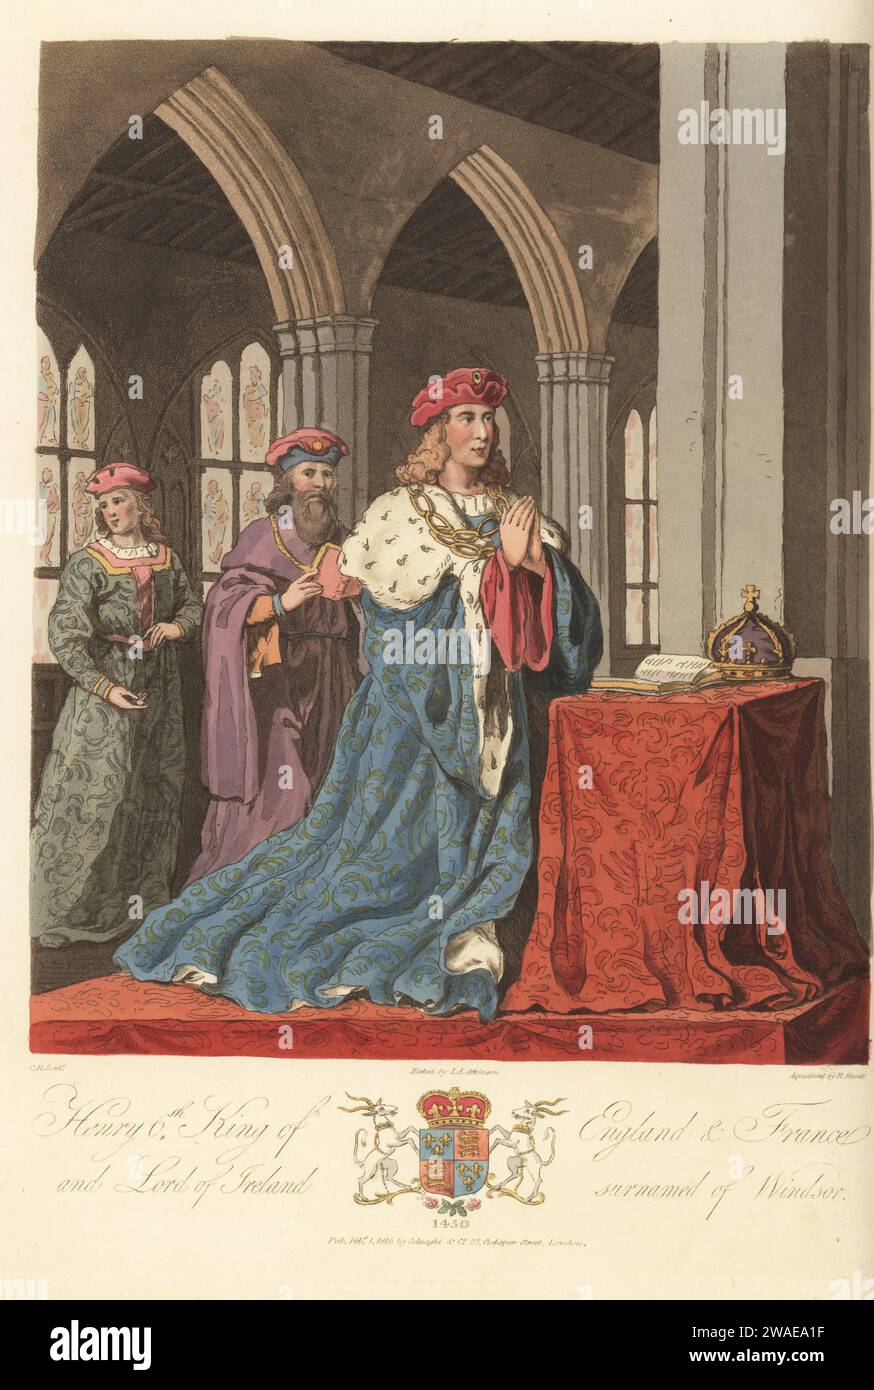 King Henry VI of England and France, at his devotions, 1450. The King wears a crimson velvet cap, sky-blue gown lined with ermine, large gold chain. He kneels at a covered table with missal and crown in St. Michael's church, Coventry. From a tapestry in St. Mary's Guildhall, Coventry. Handcoloured copperplate engraving etched by John Augustus Atkinson, aquatinted by Robert Havell, after an illustration by Charles Hamilton Smith from his own Selections of Ancient Costume of Great Britain and Ireland, Colnaghi and Co., London, 1814. Stock Photo